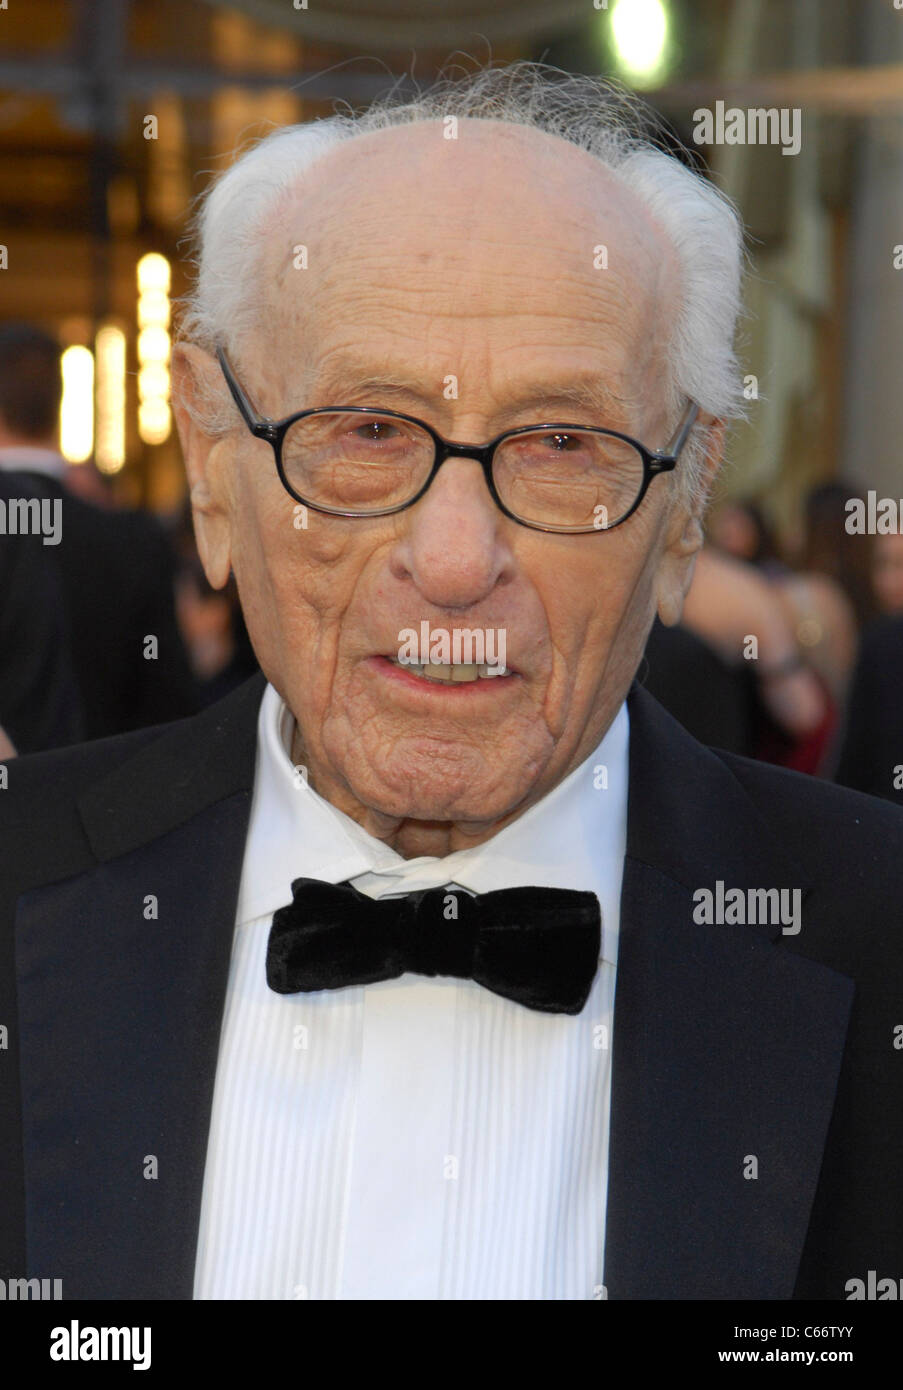 Eli Wallach at arrivals for The 83rd Academy Awards Oscars - Arrivals Part 1, The Kodak Theatre, Los Angeles, CA February 27, 2011. Photo By: Elizabeth Goodenough/Everett Collection Stock Photo